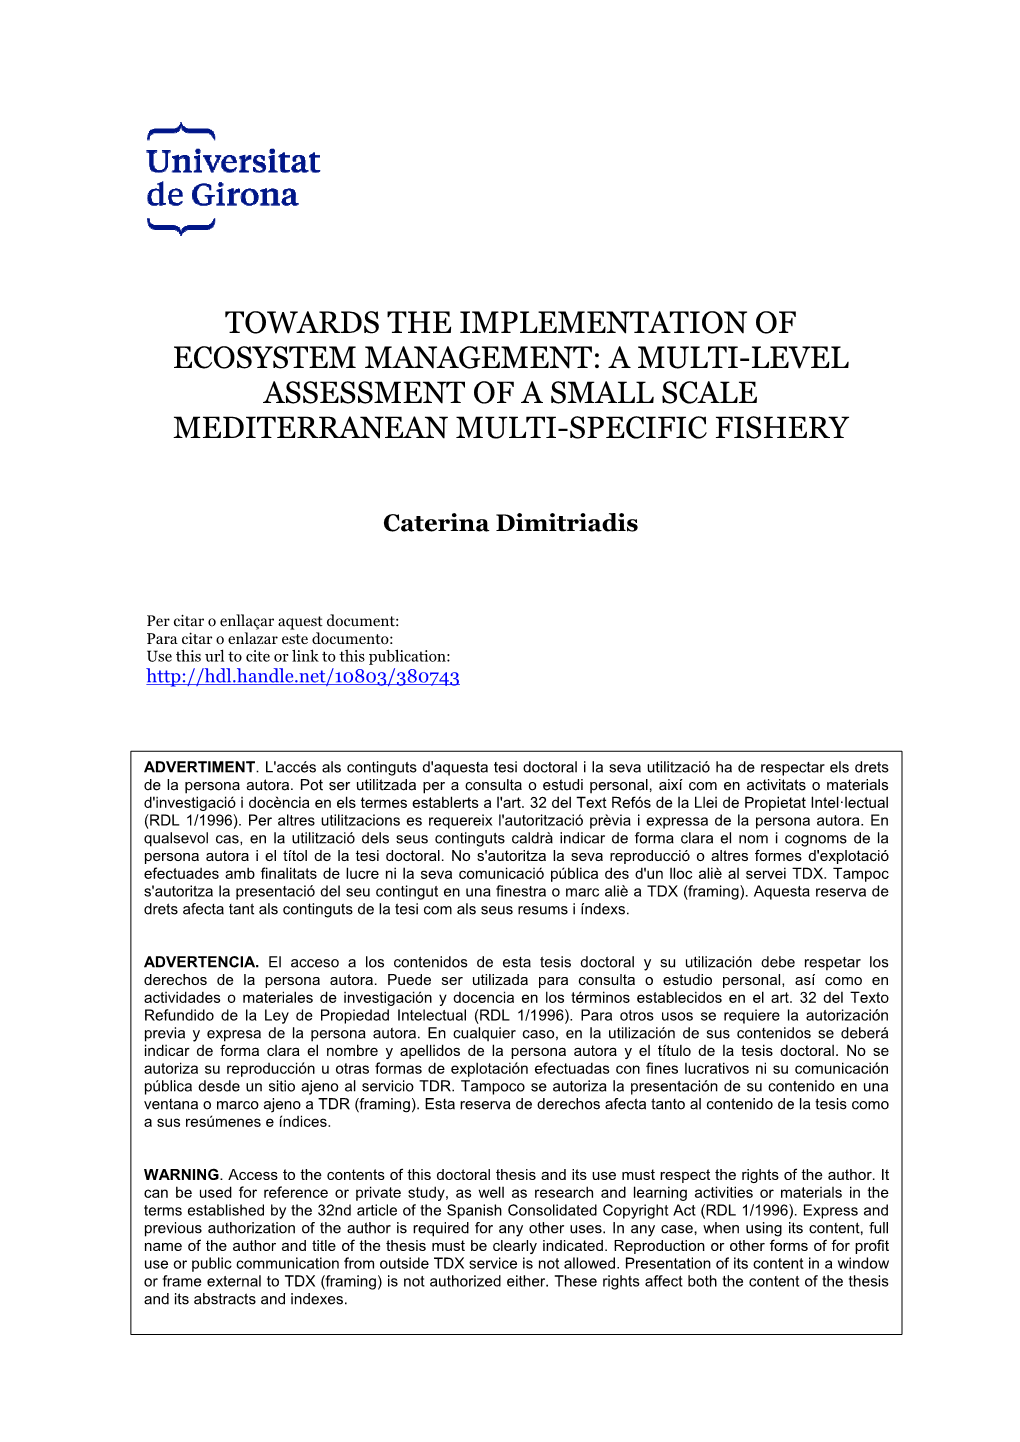 Towards the Implementation of Ecosystem Management: a Multi-Level Assessment of a Small Scale Mediterranean Multi-Specific Fishery